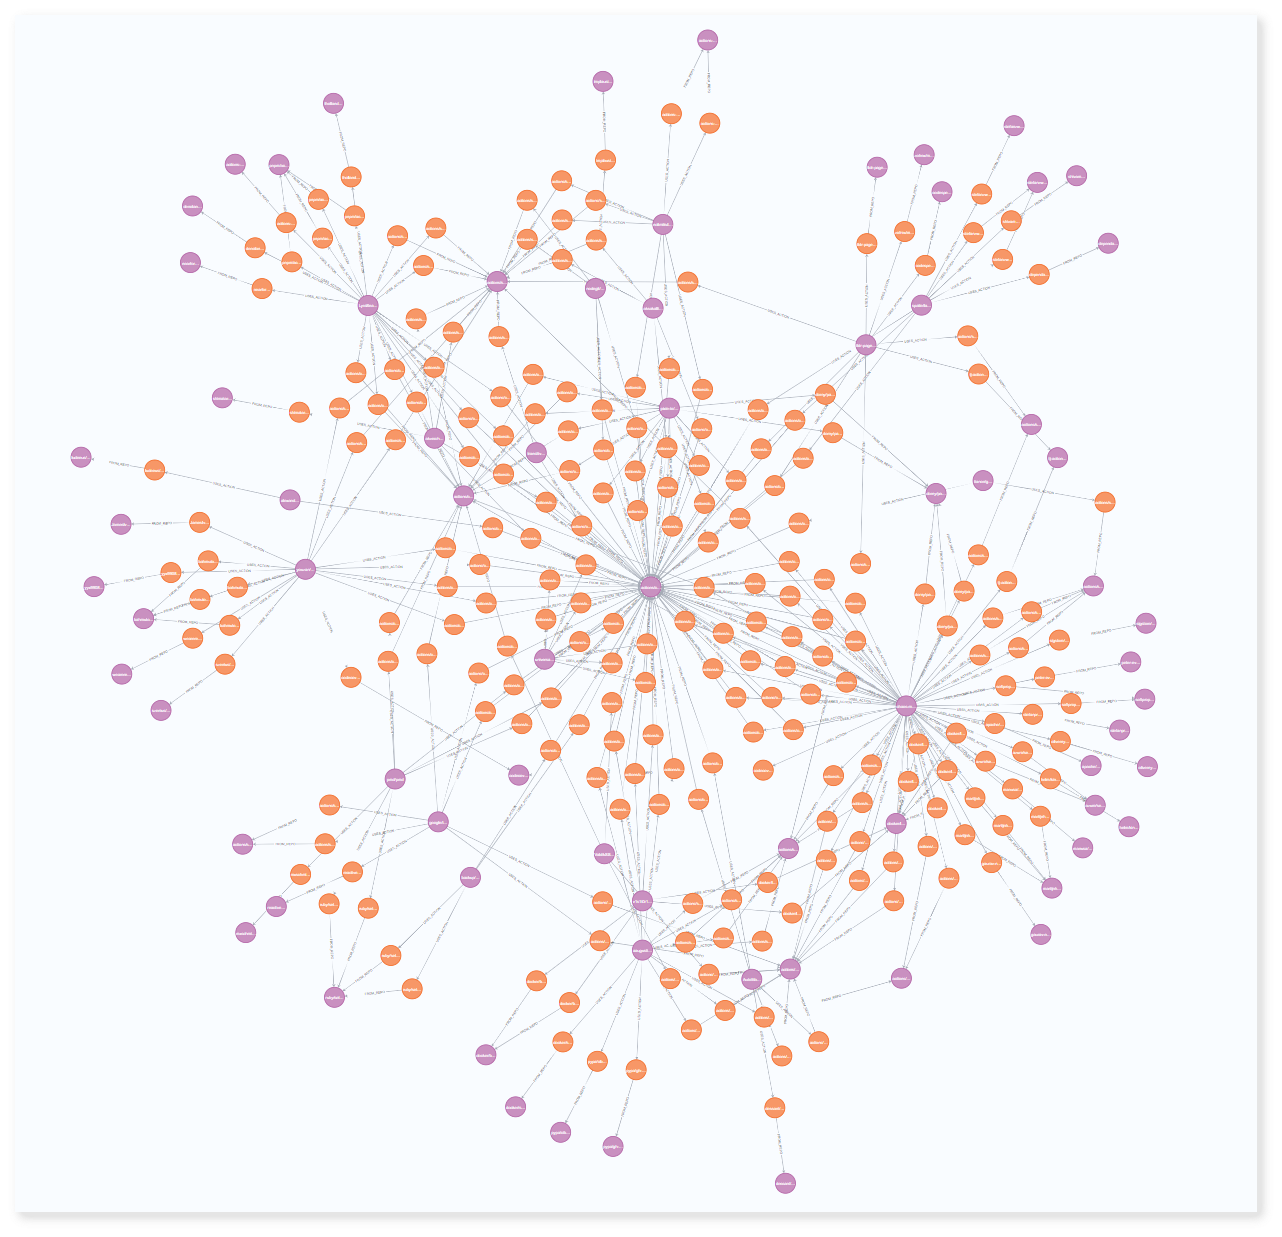 GitHub Actions dependency tree over a Neo4j graph referred to as “The Flower”